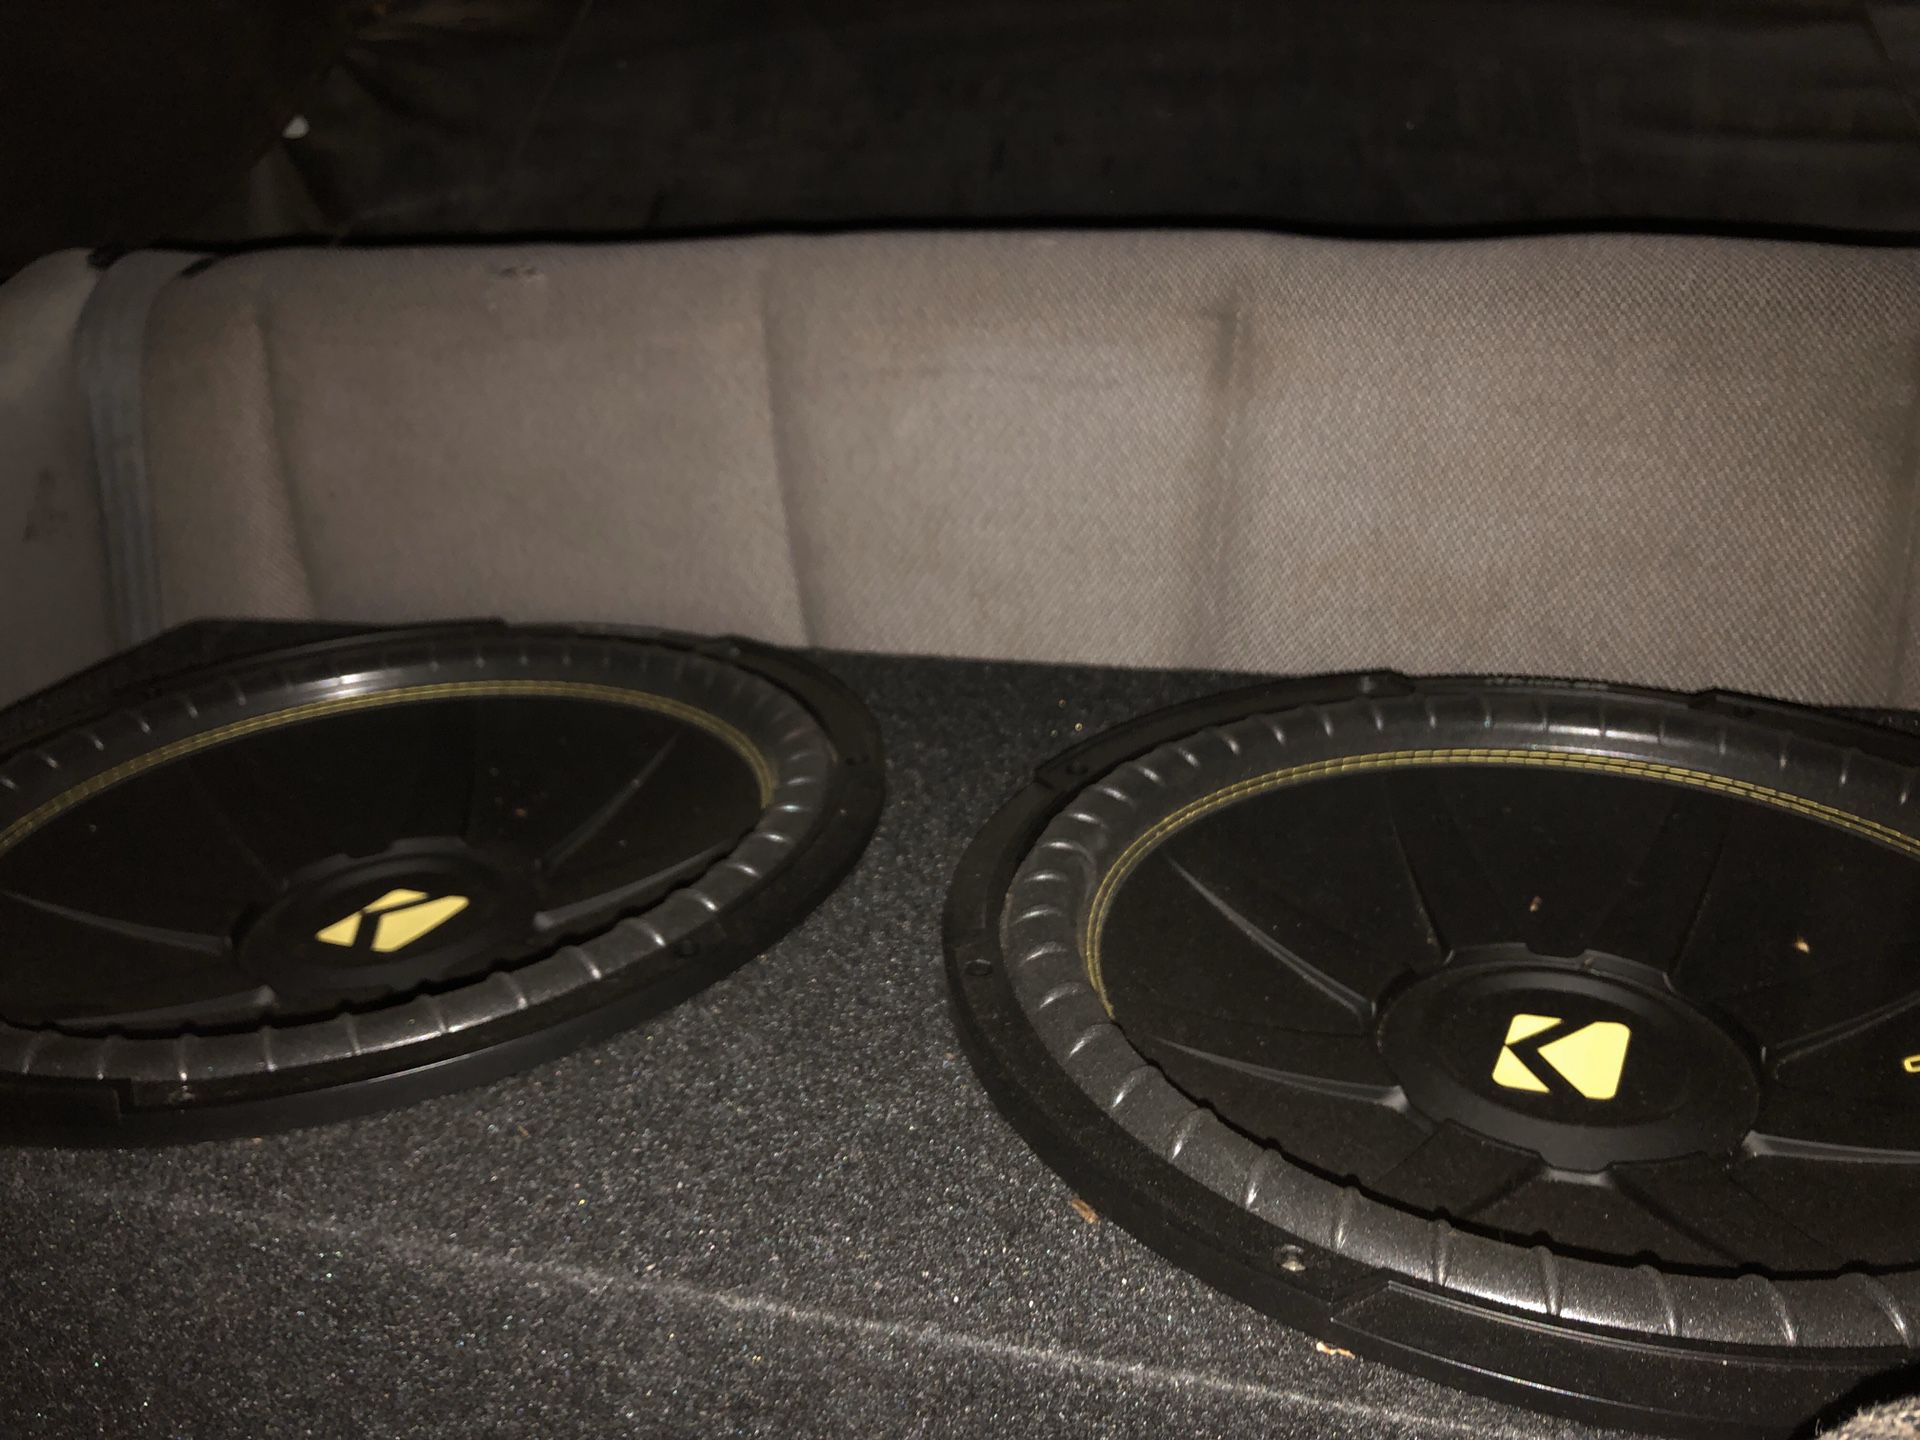 Kicker subwoofers and amplifier